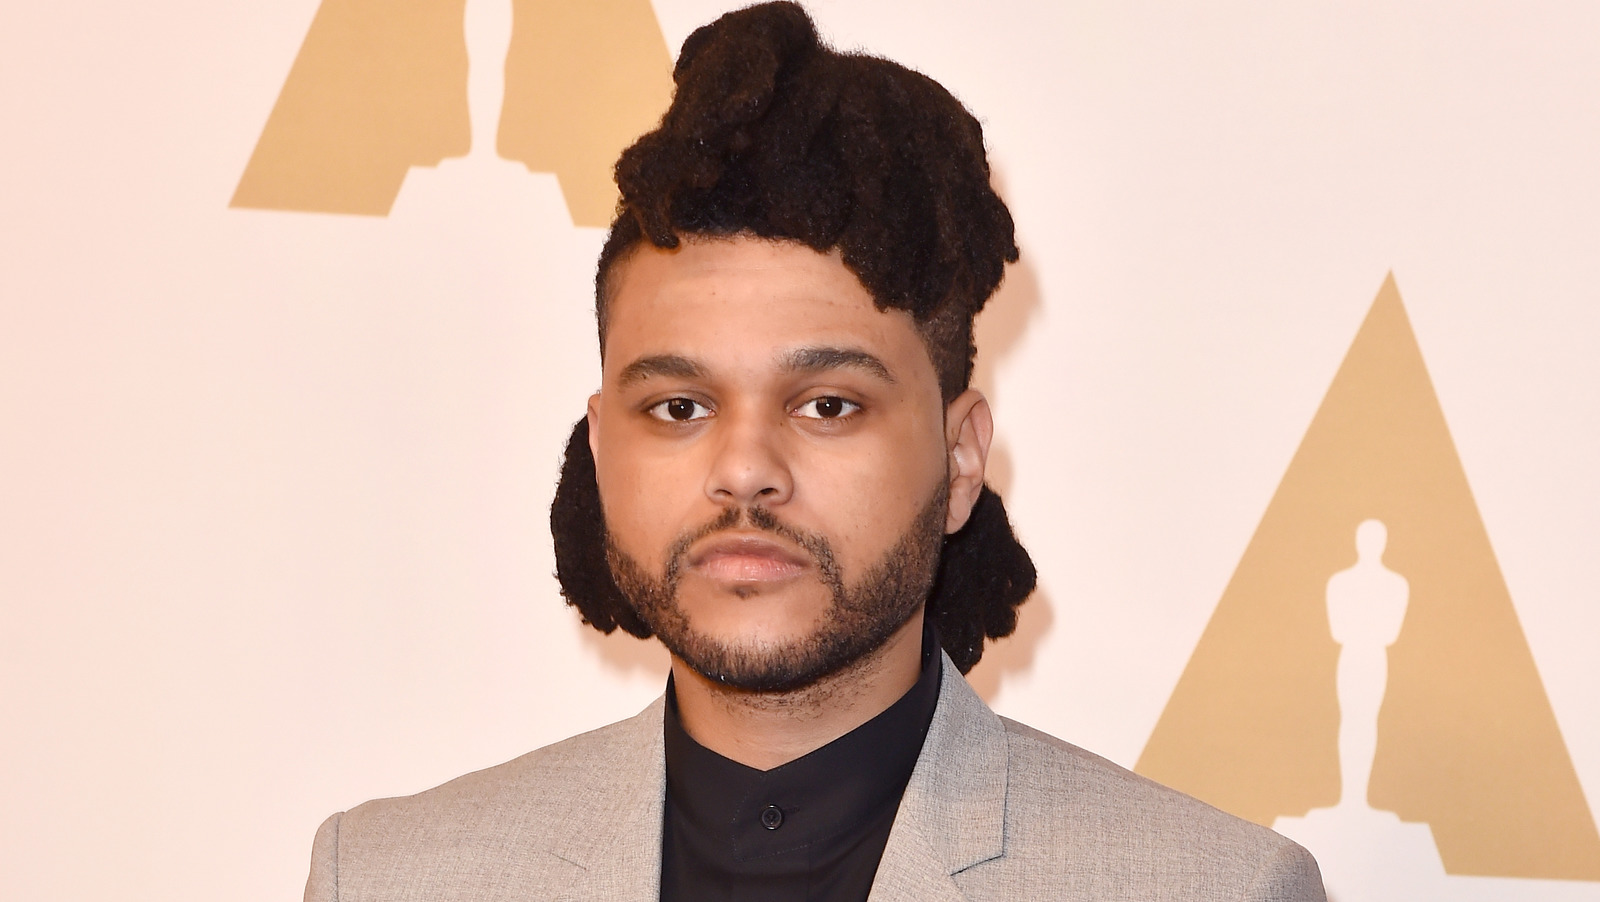 The Real Meaning Behind 'Save Your Tears' By The Weeknd